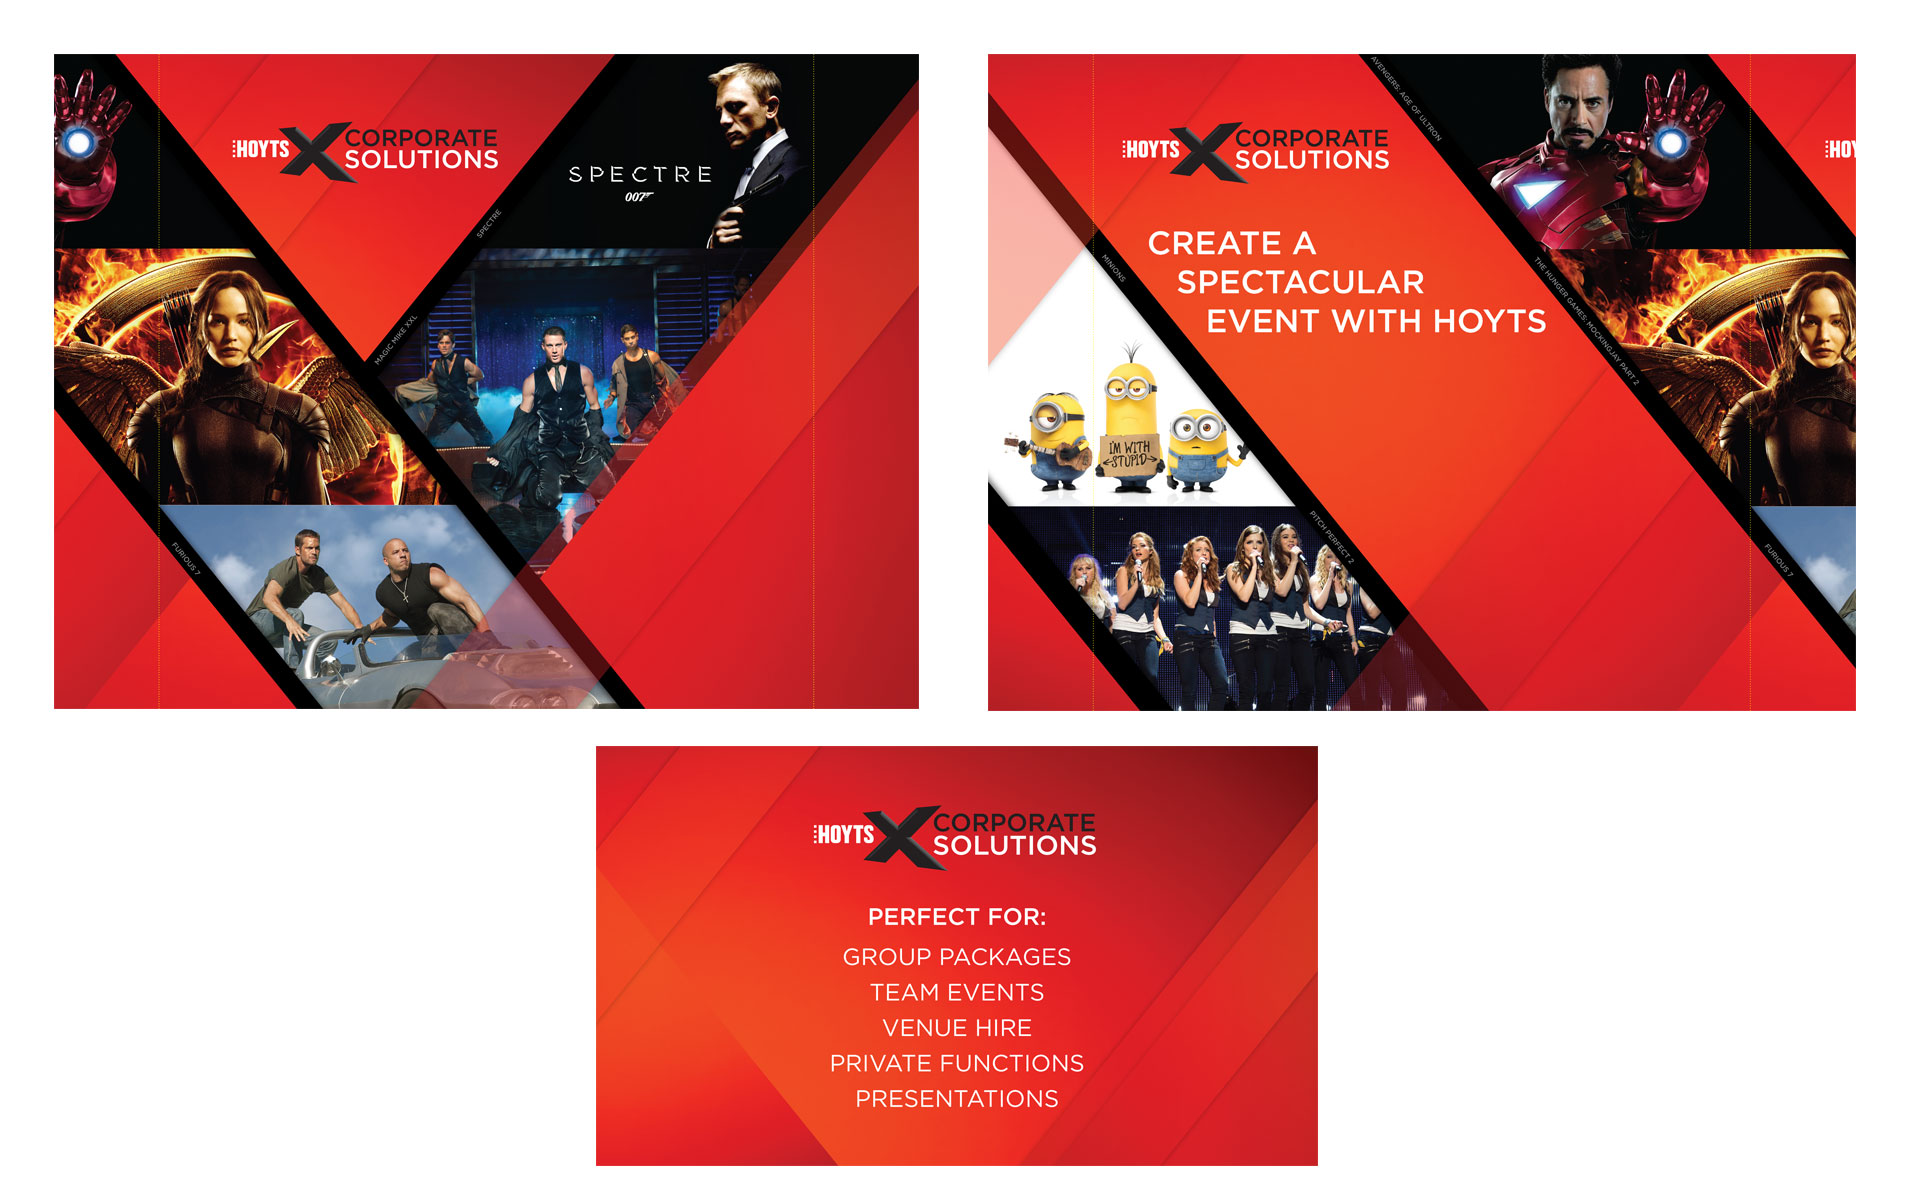 HOYTS Corporate Solutions branding, marketing, publications & online work designed by Amy at Yellow Sunday